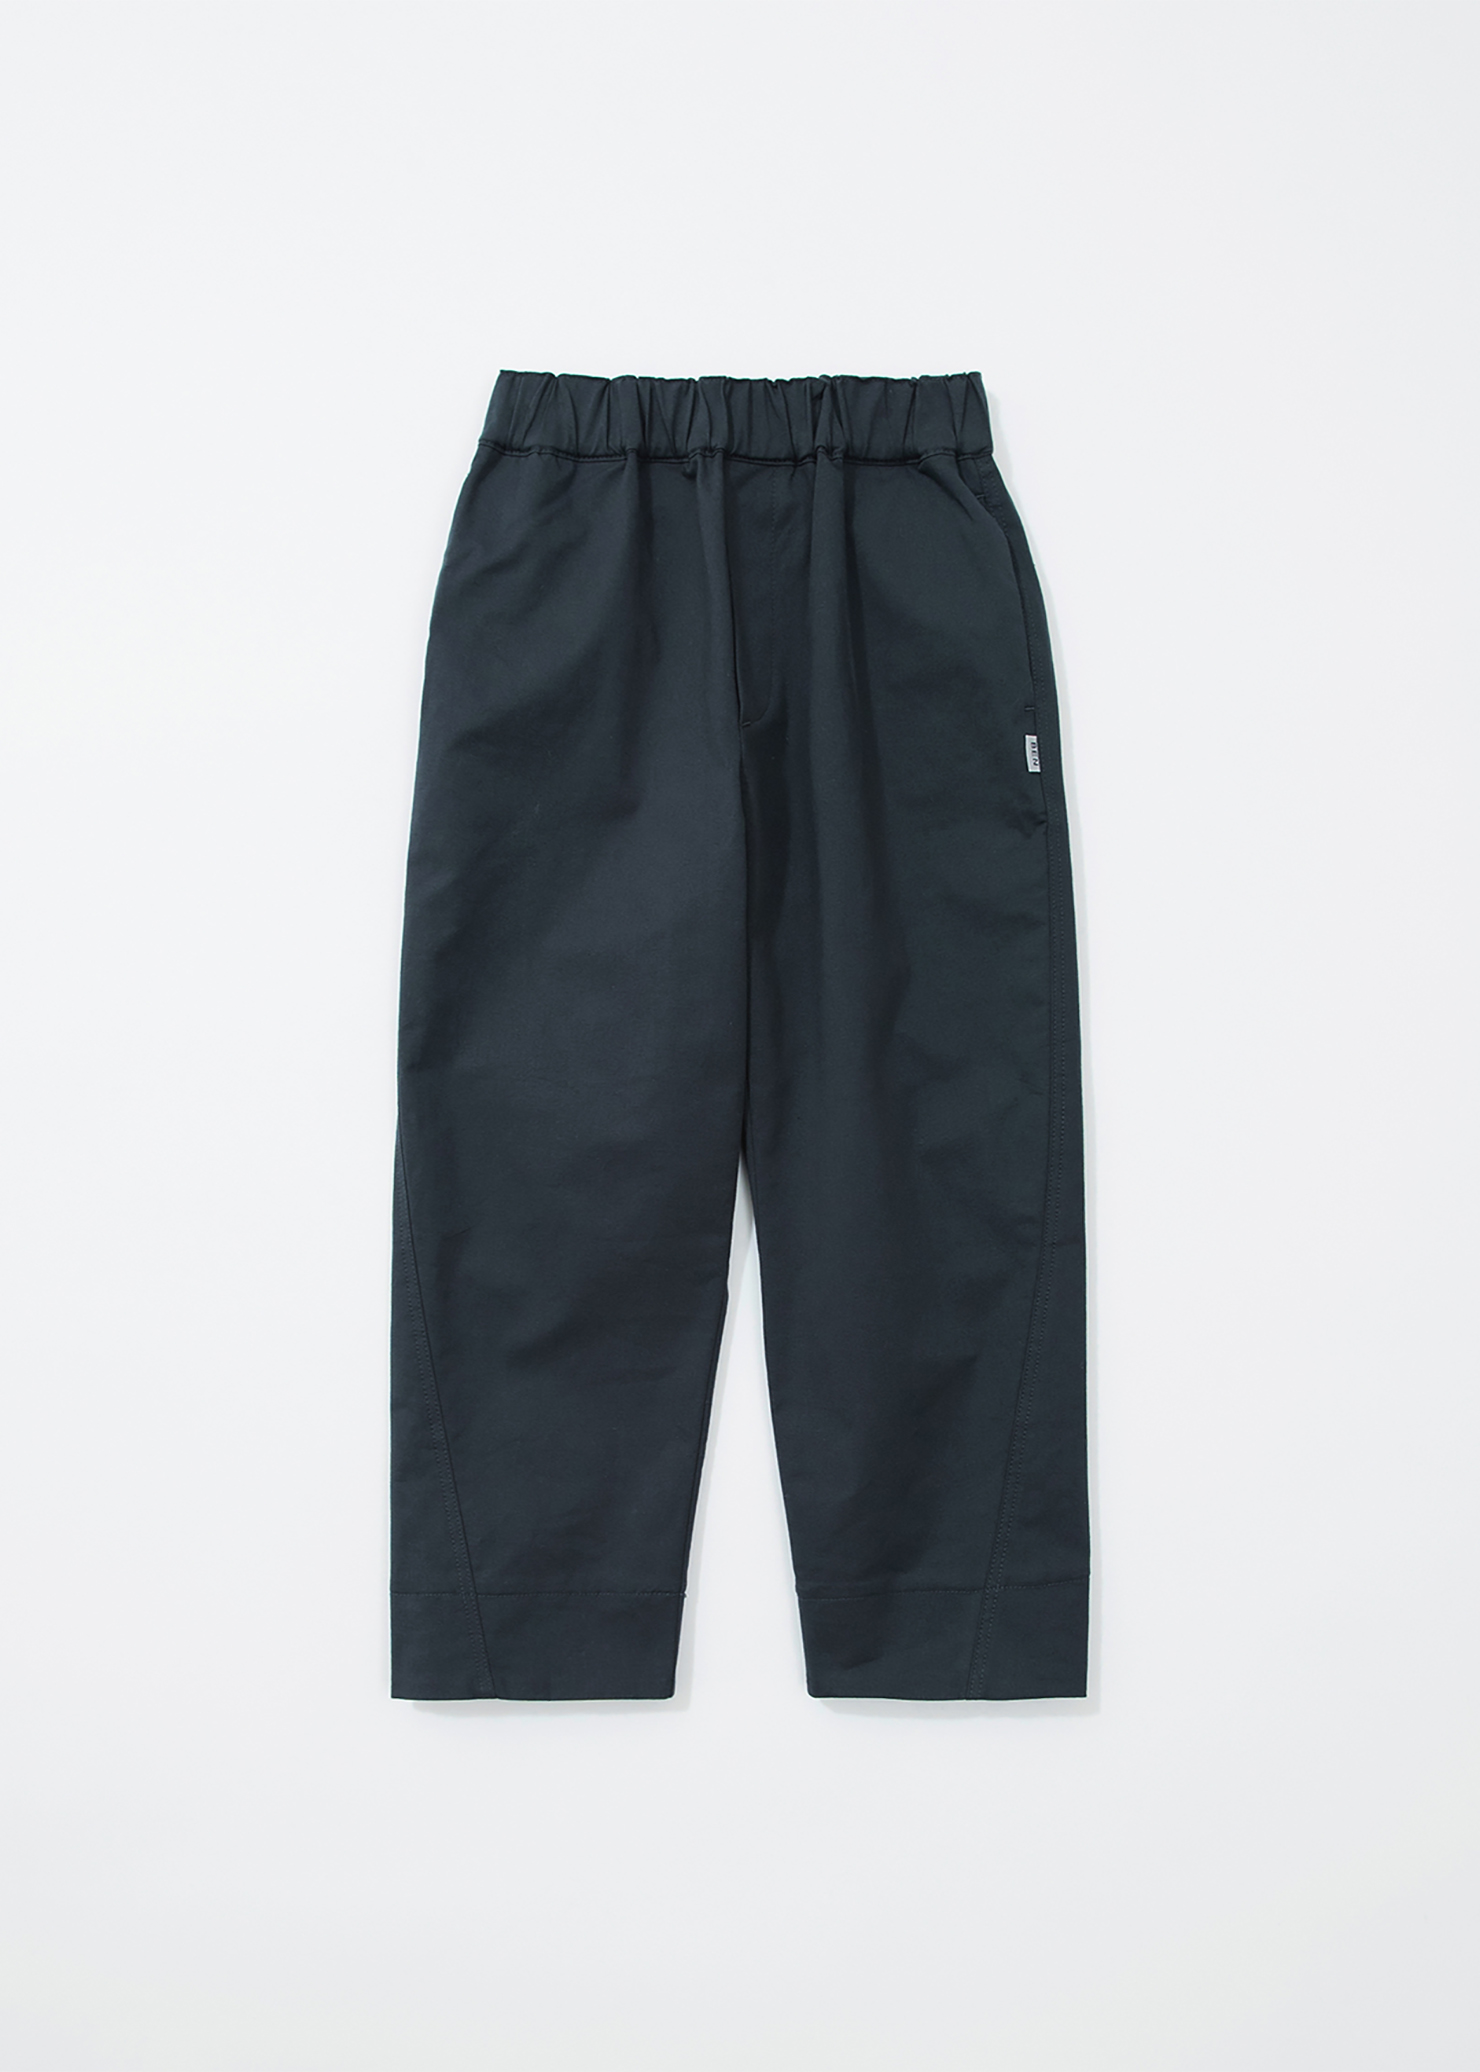 03 Signature Trousers_Charcoal